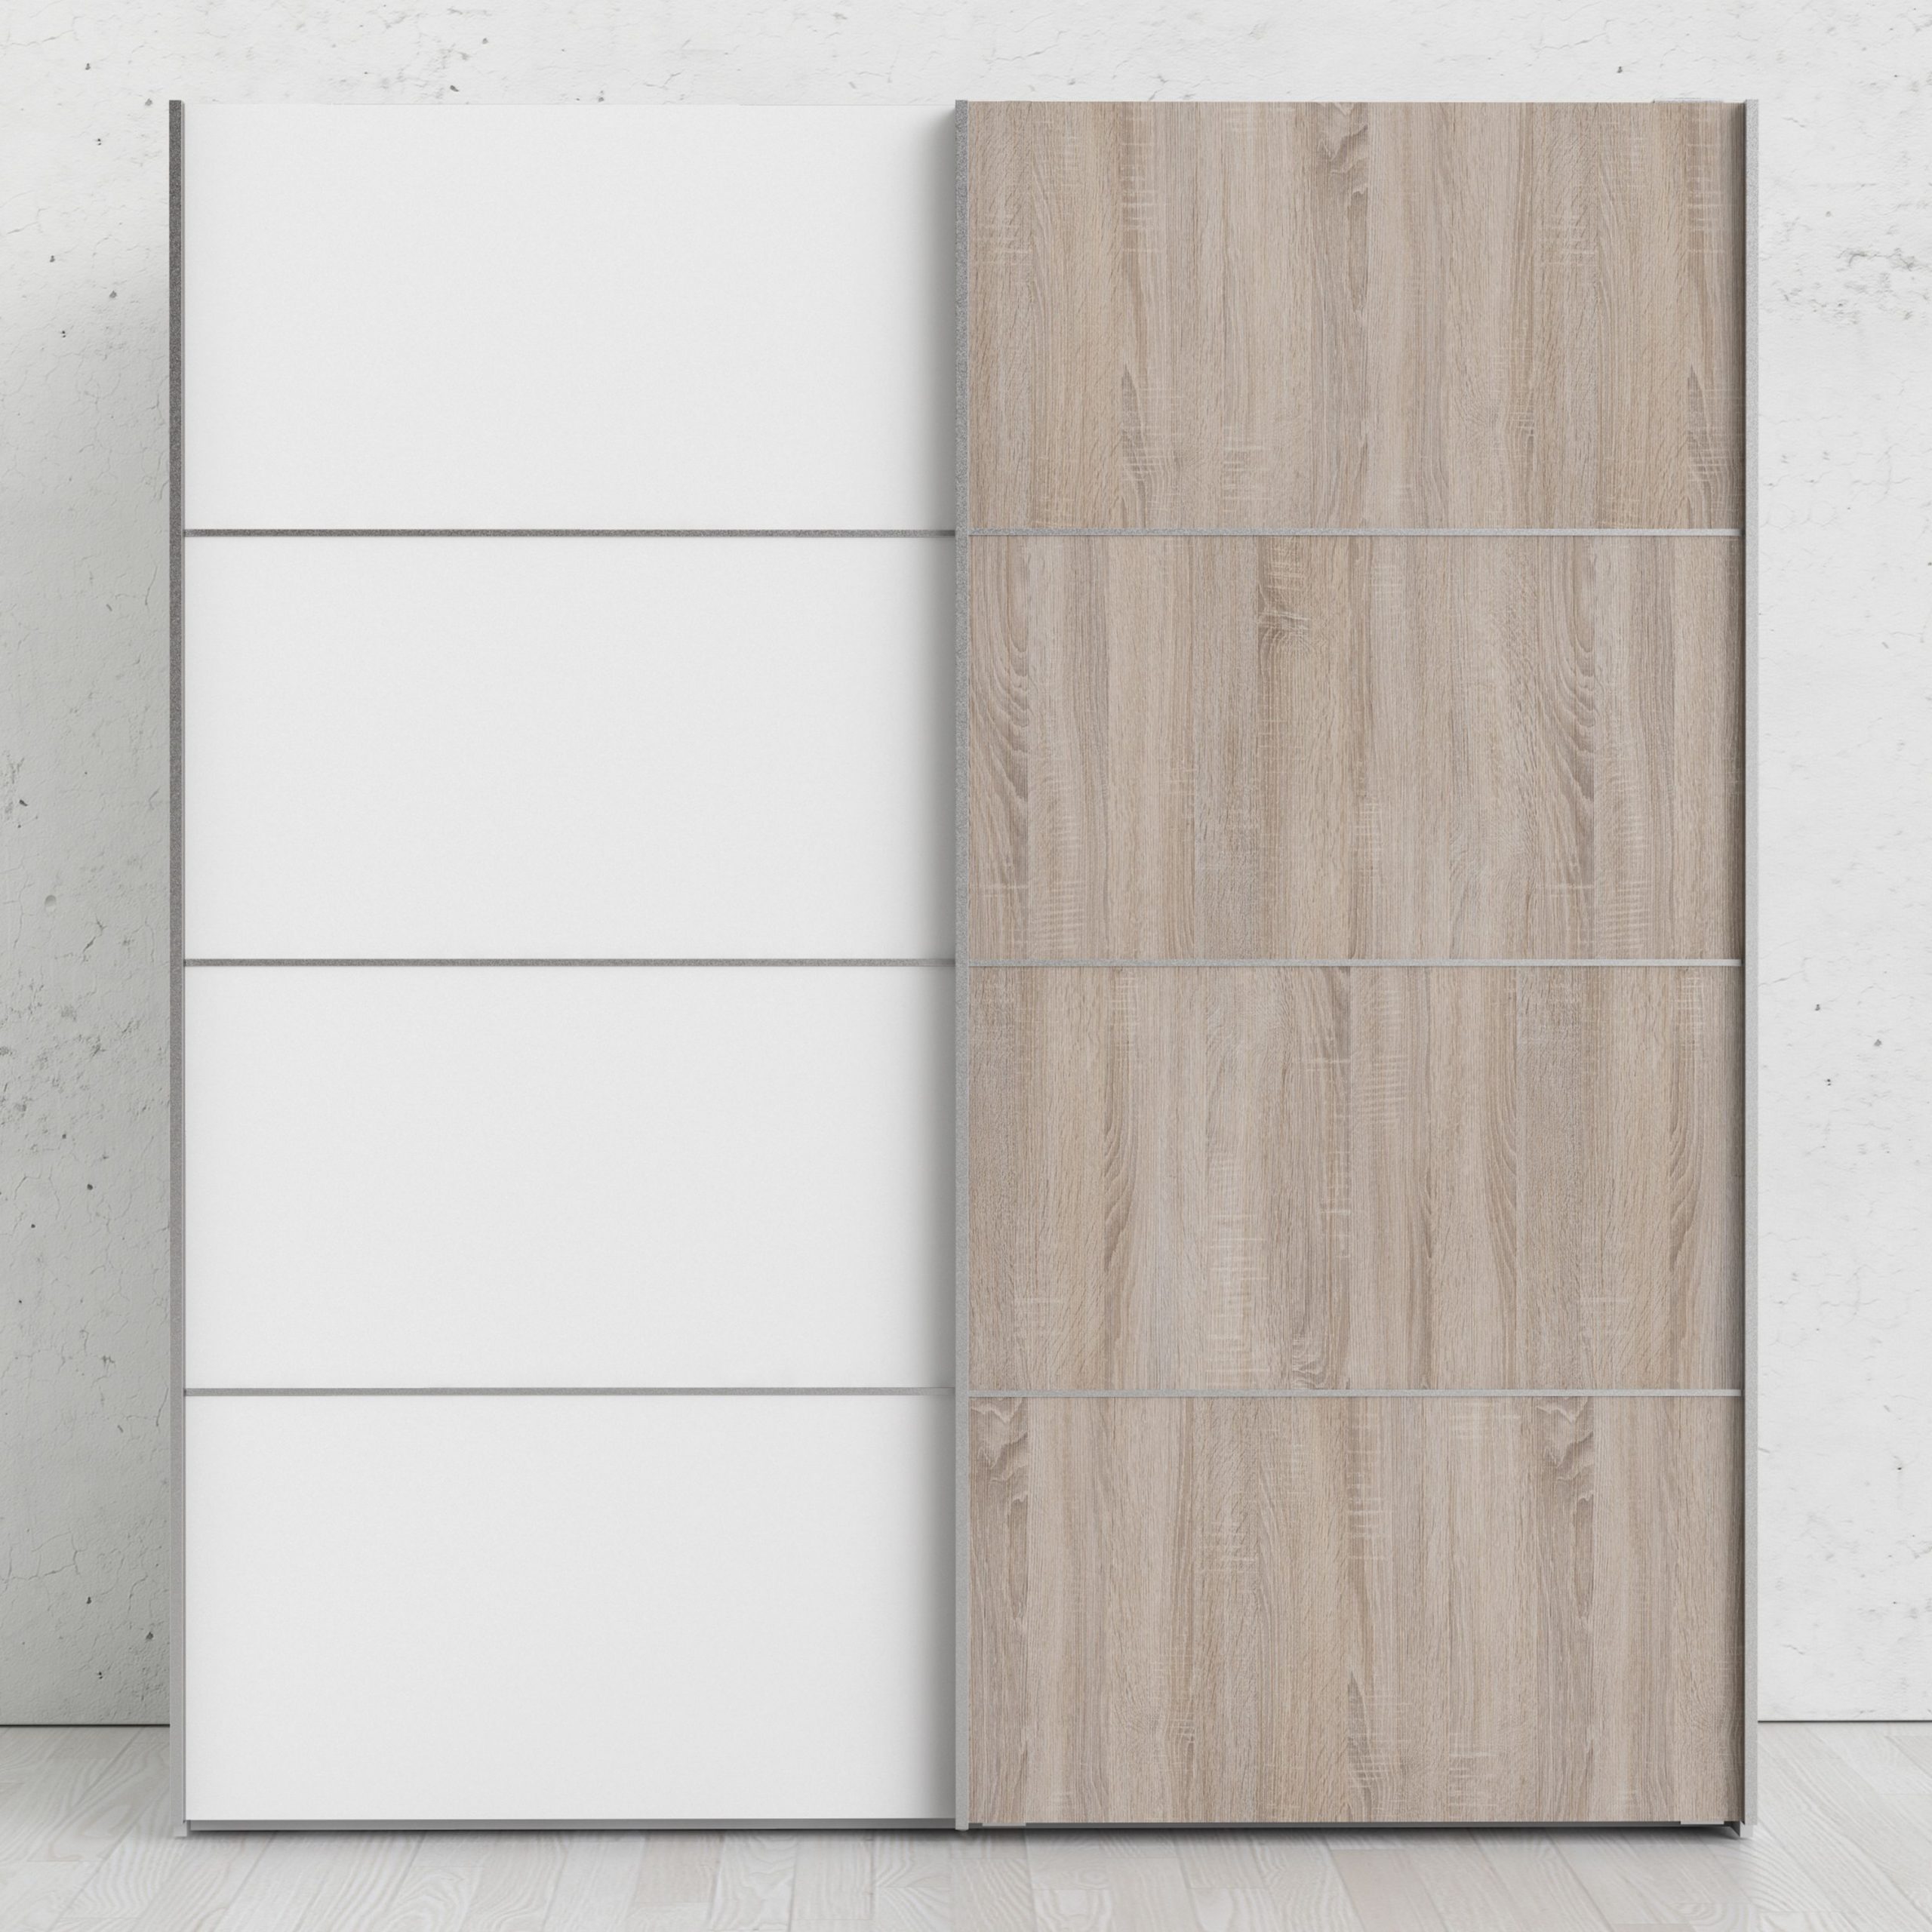 Verona Sliding Wardrobe 180cm In White With White And Truffle Oak Doors With 2 Shelves